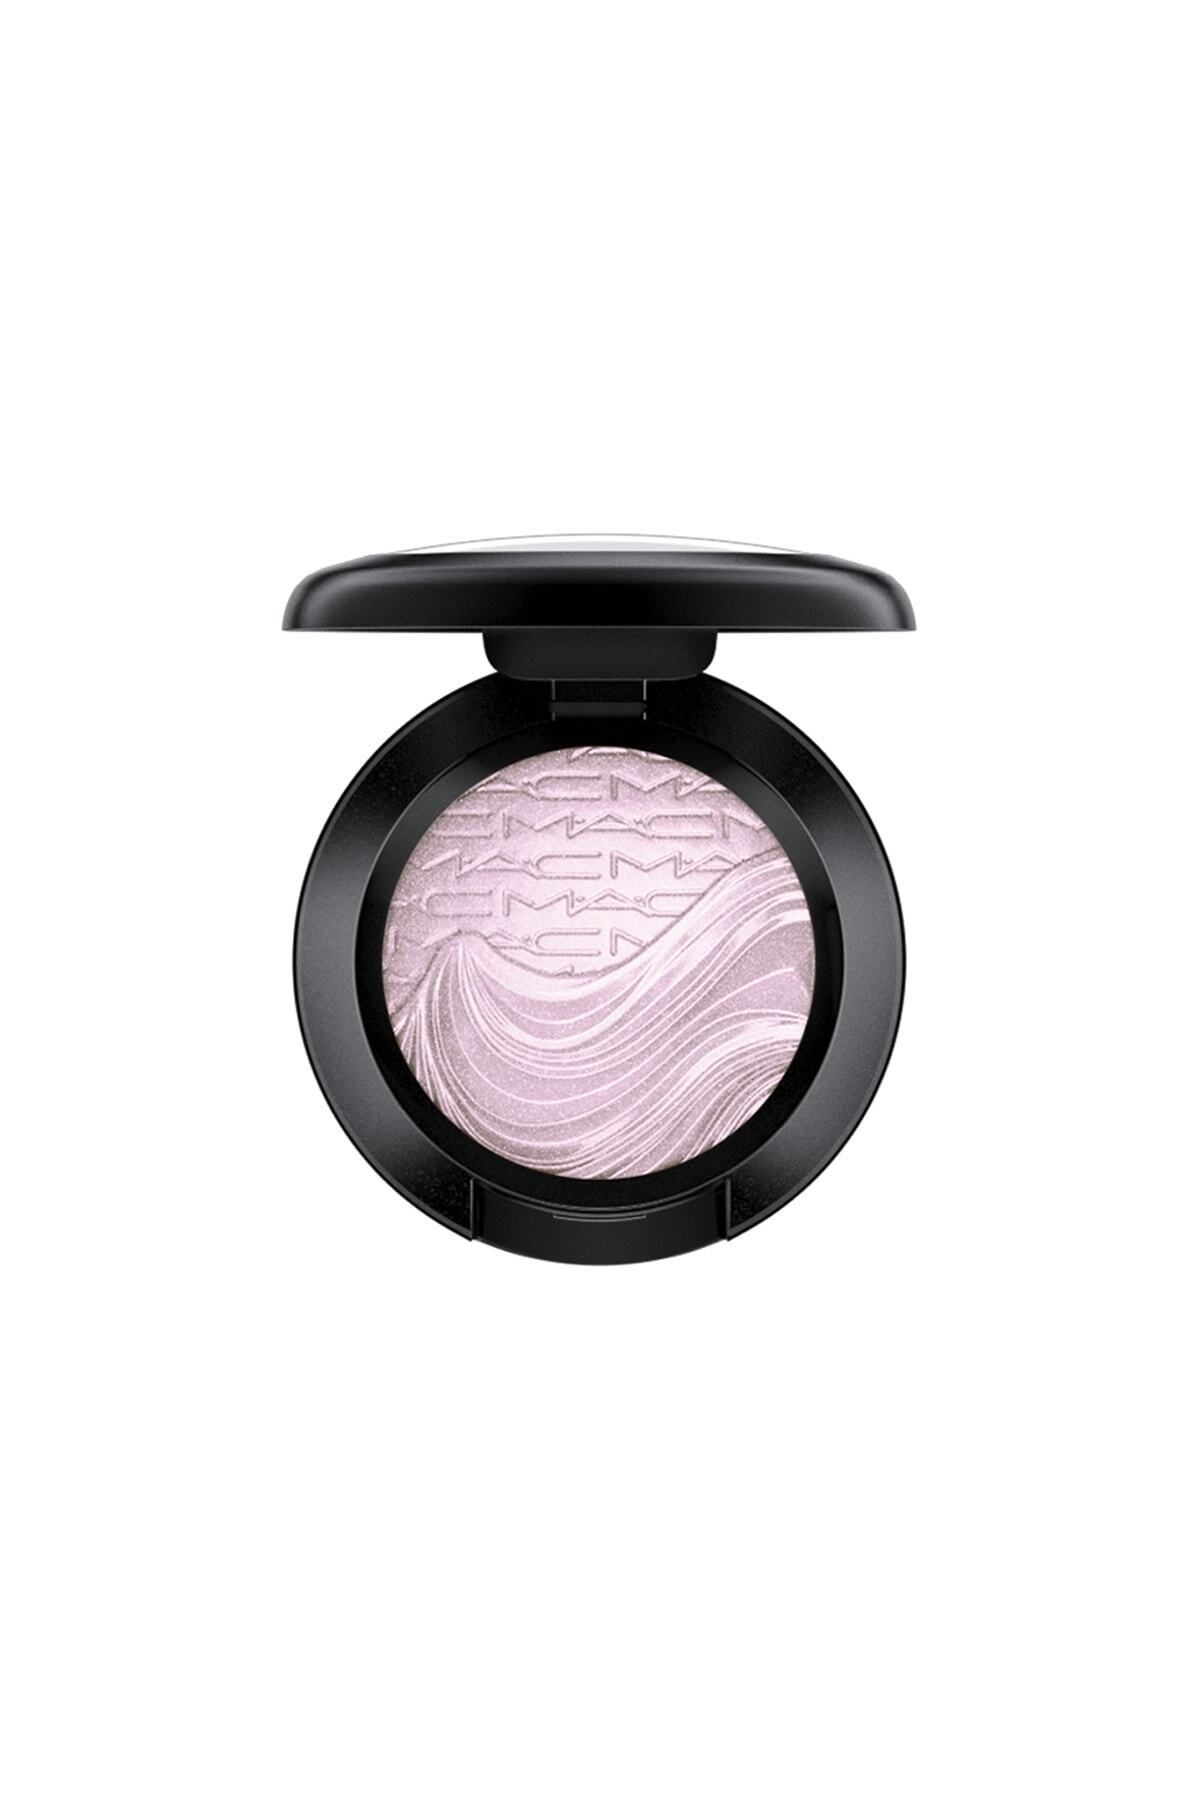 Mac SOFT STRUCTURE - EXTRA DİMENSİON EYESHADOW READY TO PARTY EYE SHADOW - 1.3 G PSSN846